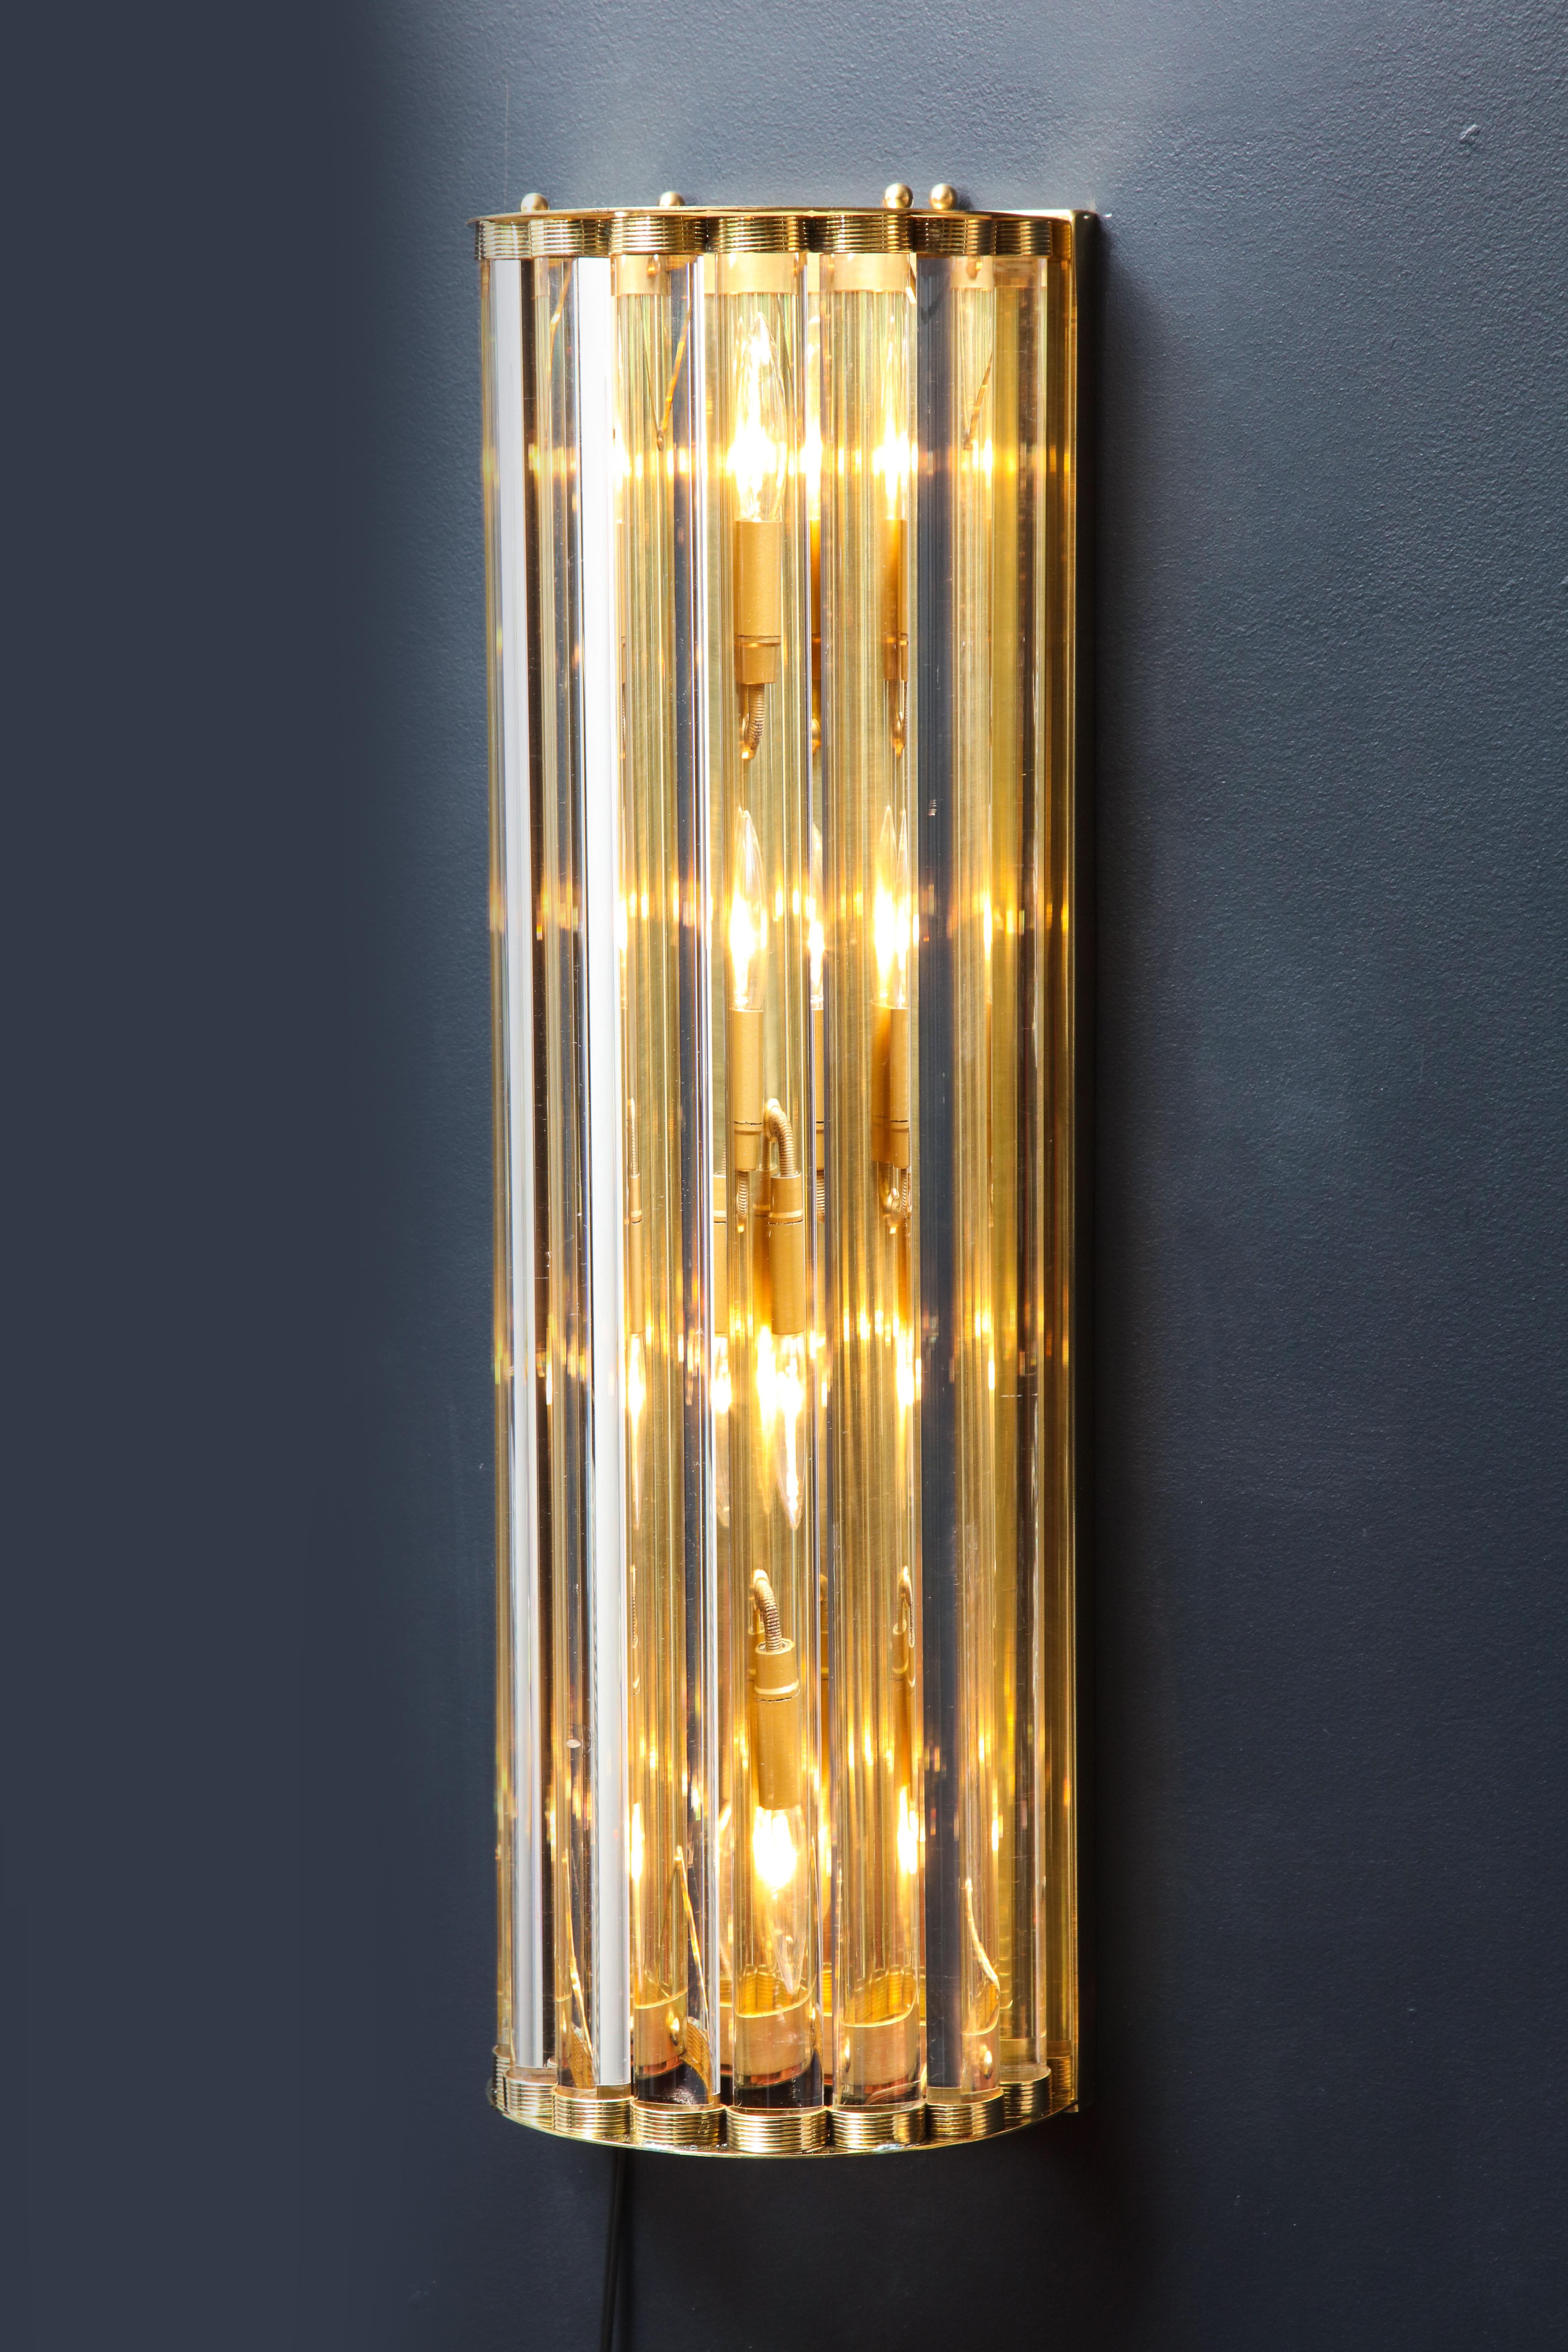 Italian Large Pair of Murano Glass Rods and Brass Wall Sconces, Italy, 2018, 2 ft height